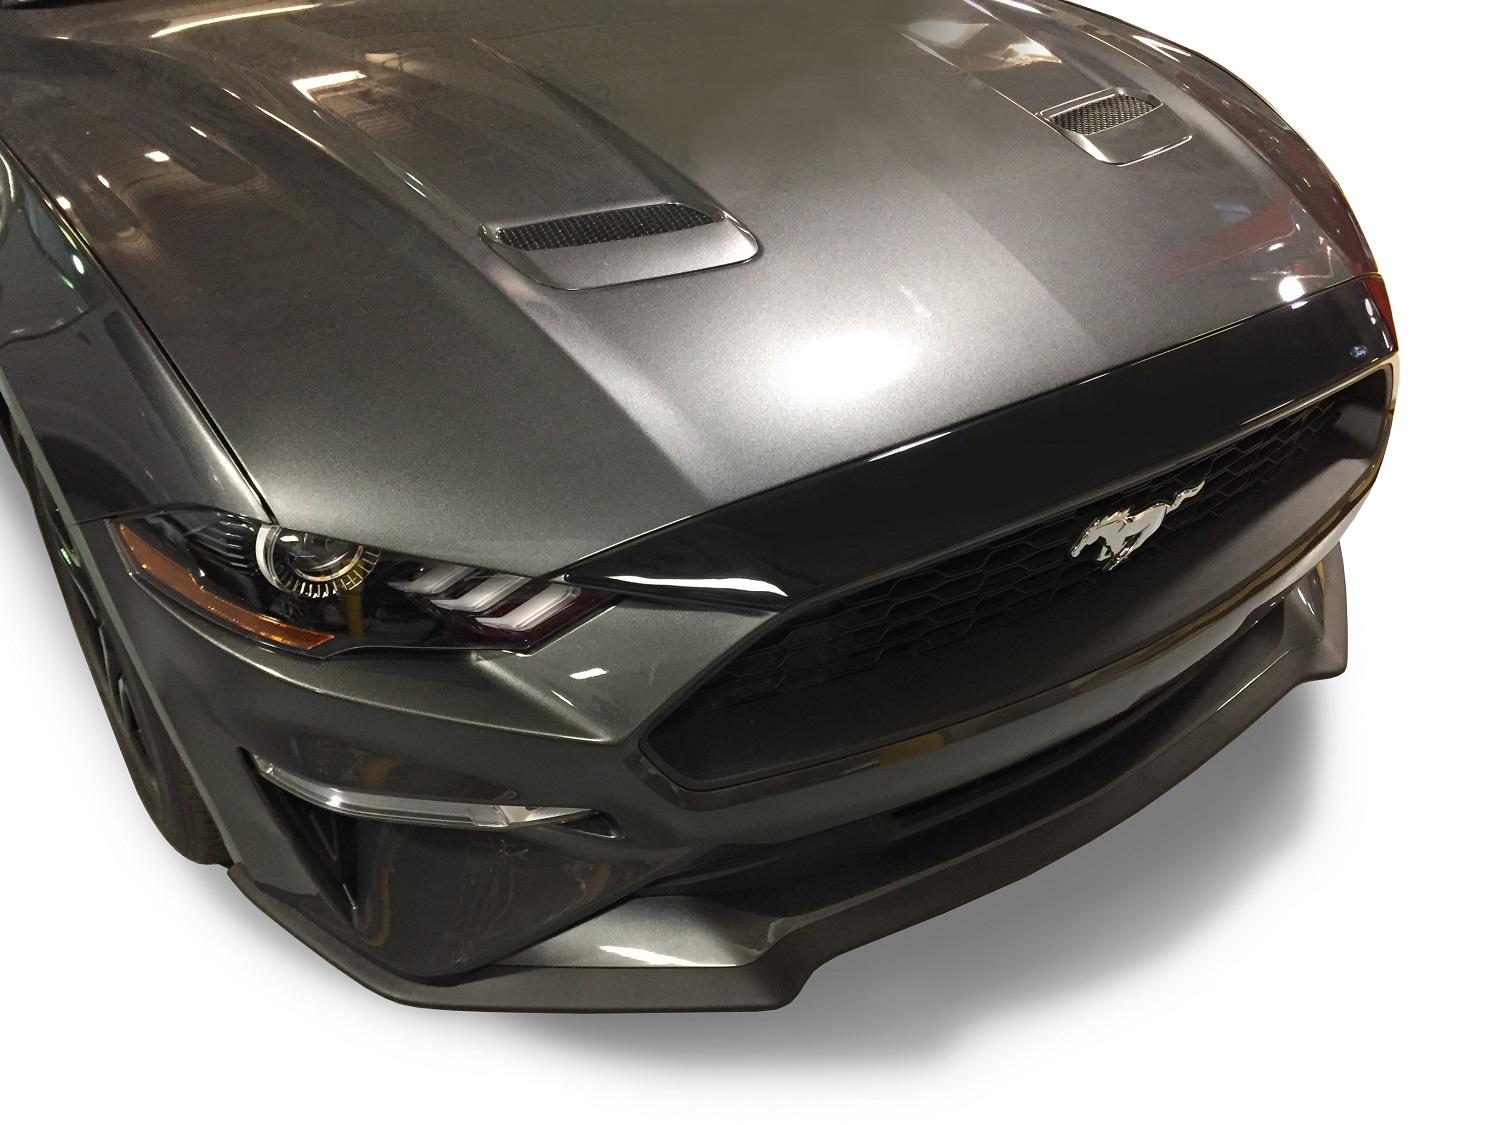 ZHEYANG Protege Jantes Voiture pour Ford Mustang,Protection pour